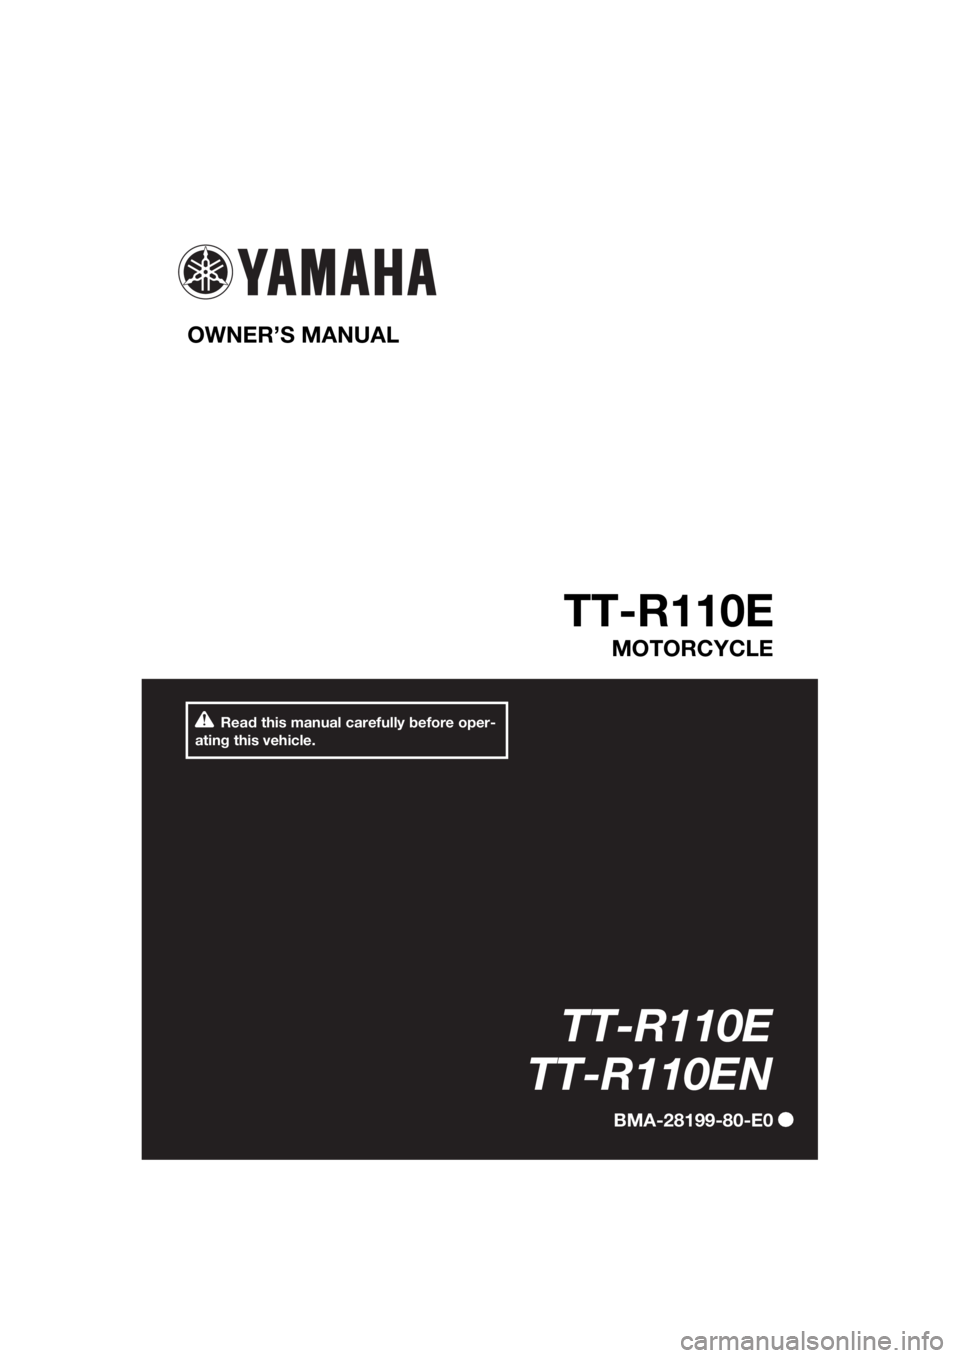 YAMAHA TT-R110E 2022  Owners Manual Read this manual carefully before oper-
ating this vehicle.
OWNER’S MANUAL 
TT-R110E
MOTORCYCLE
TT-R110E
TT-R110EN
BMA-28199-80-E0
UBMA80E0.book  Page 1  Wednesday, October 20, 2021  8:57 AM 